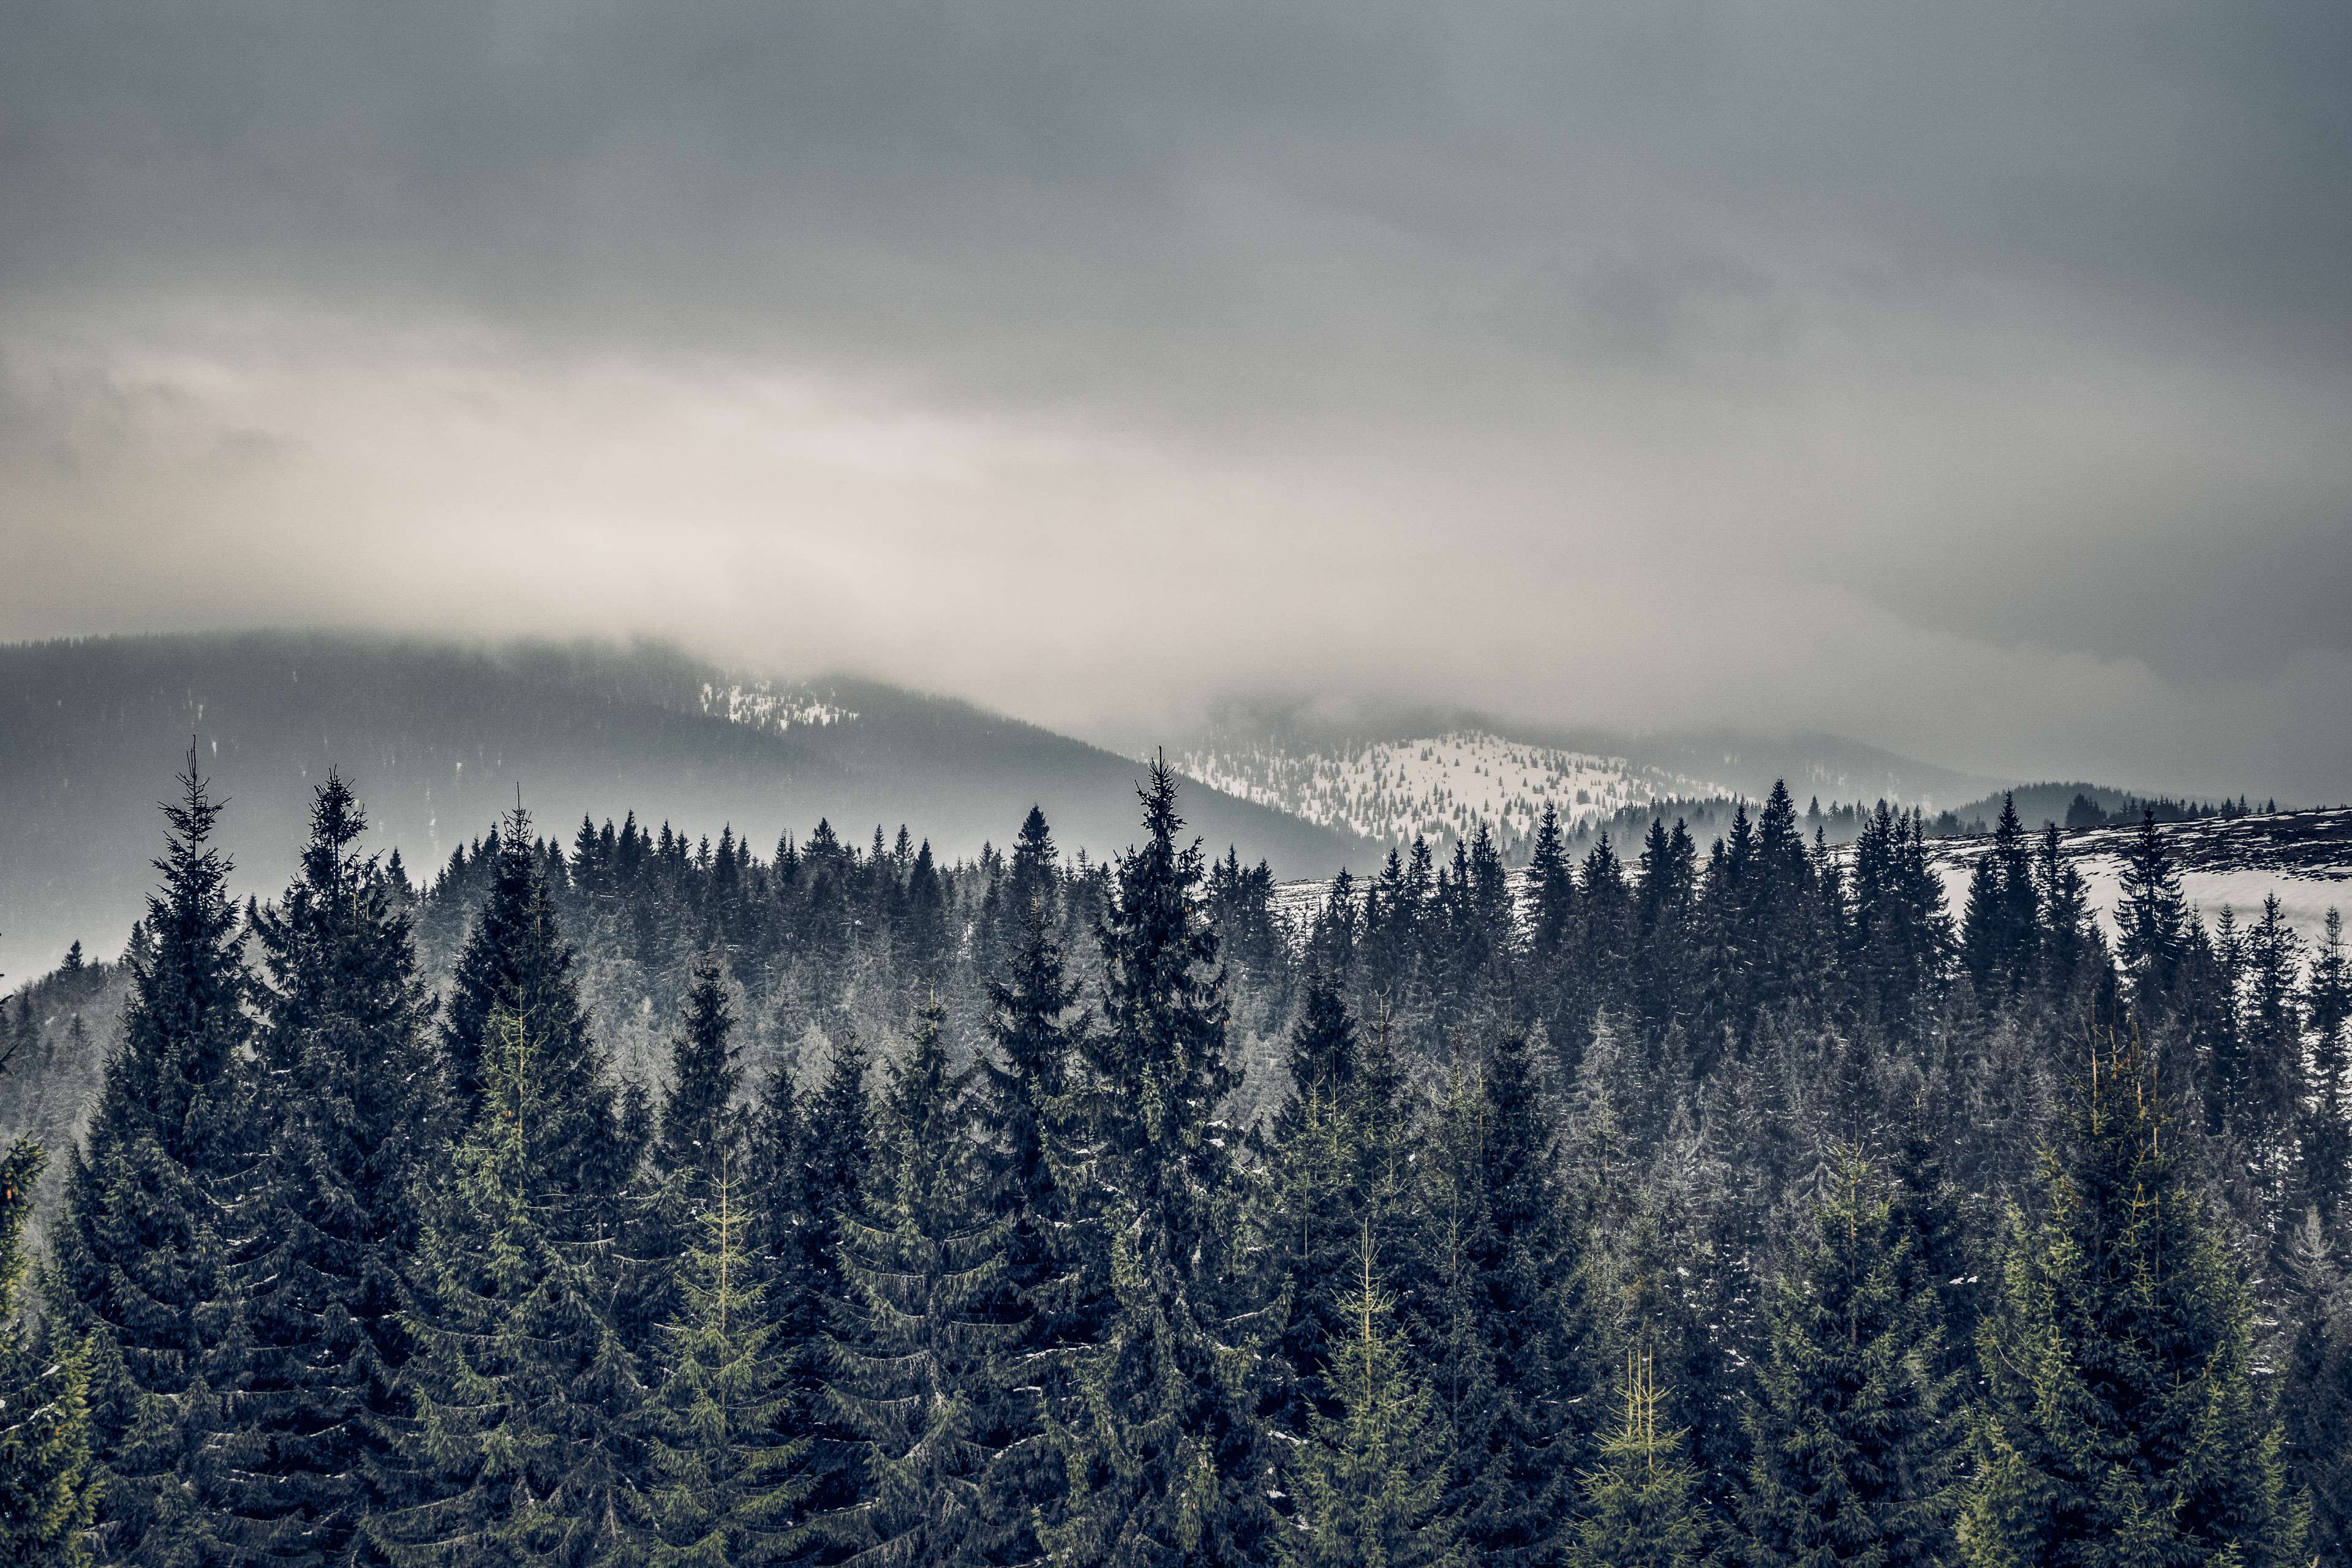 adventure, bad weather, clouds, cloudy, cold, dark, dark clouds, dark sky, dawn, earth, explore, fog, foggy, forest, landscape, light, mountain, mountains, nikon, outdoor, pines, sky, snow, sorrow, stormy, trail, vintage